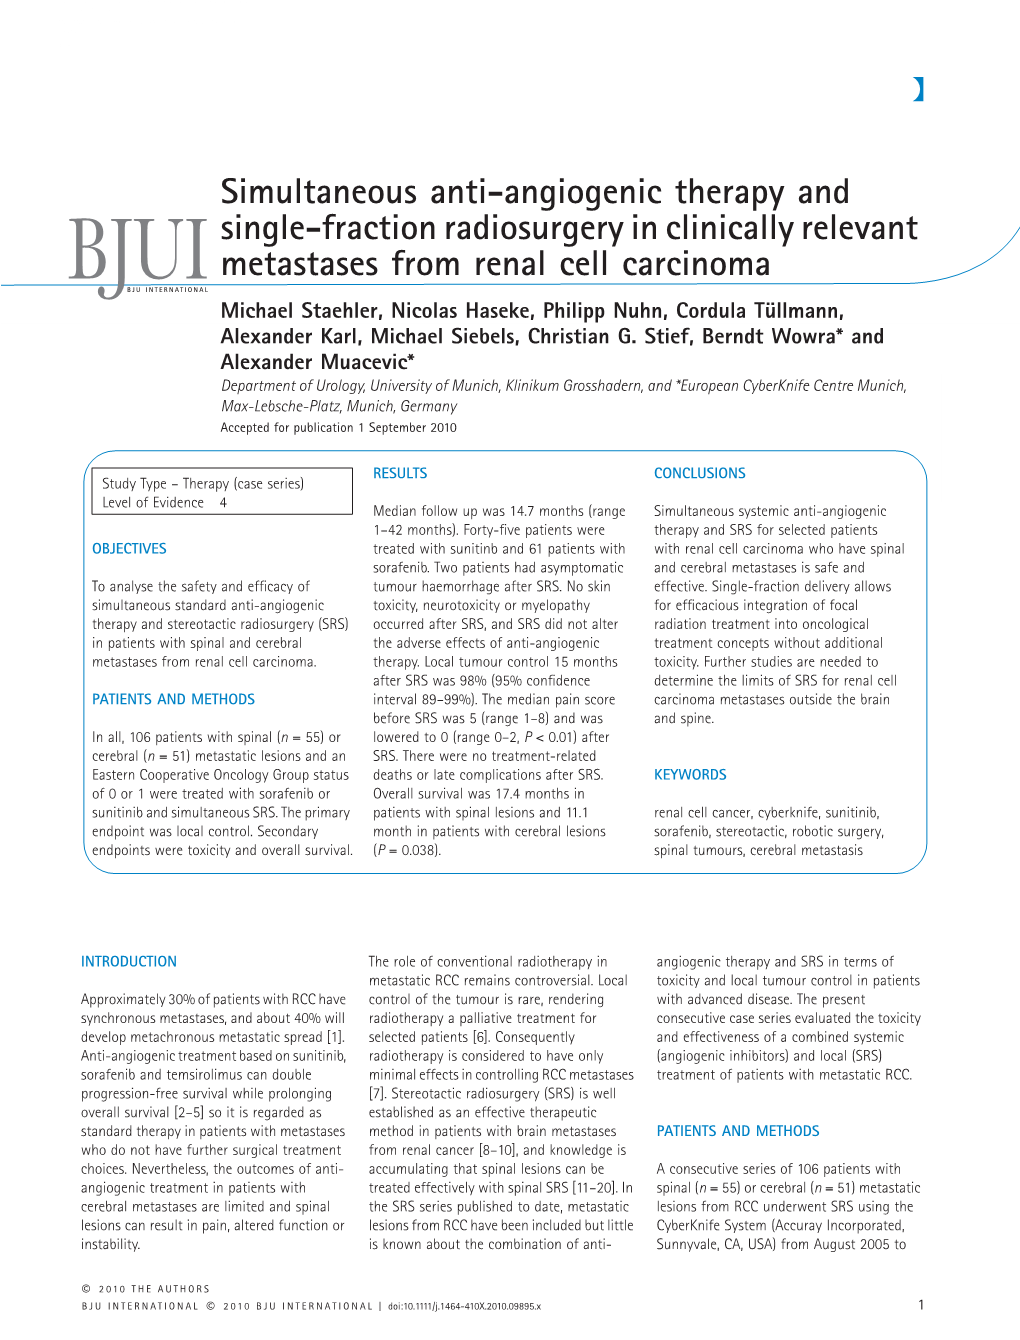 Simultaneous Antiangiogenic Therapy and Singlefraction Radiosurgery In